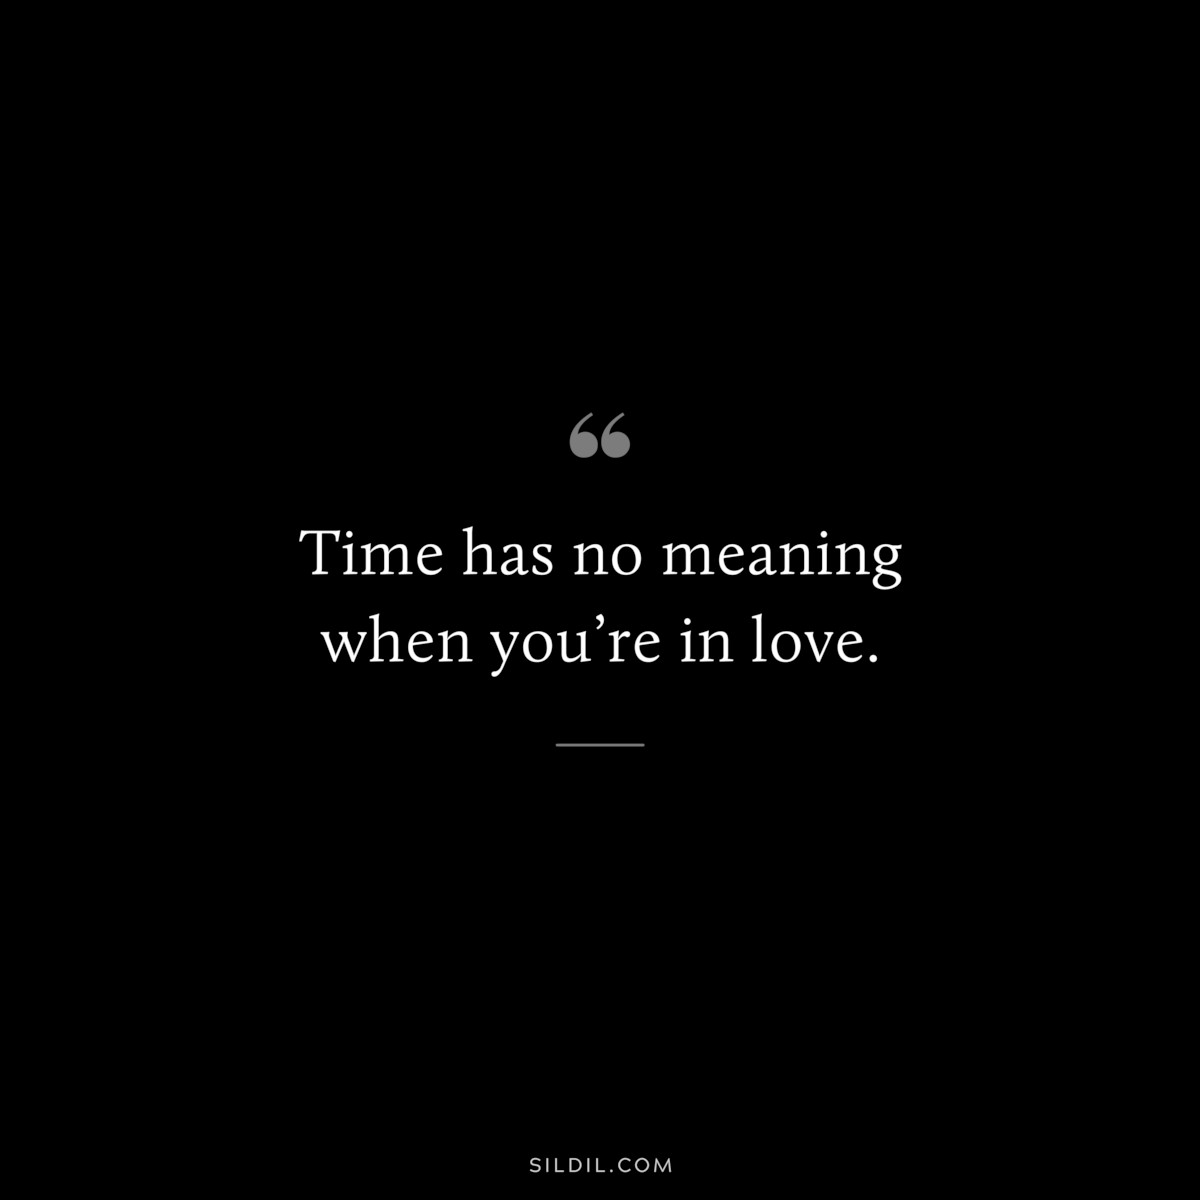 Time has no meaning when you’re in love.